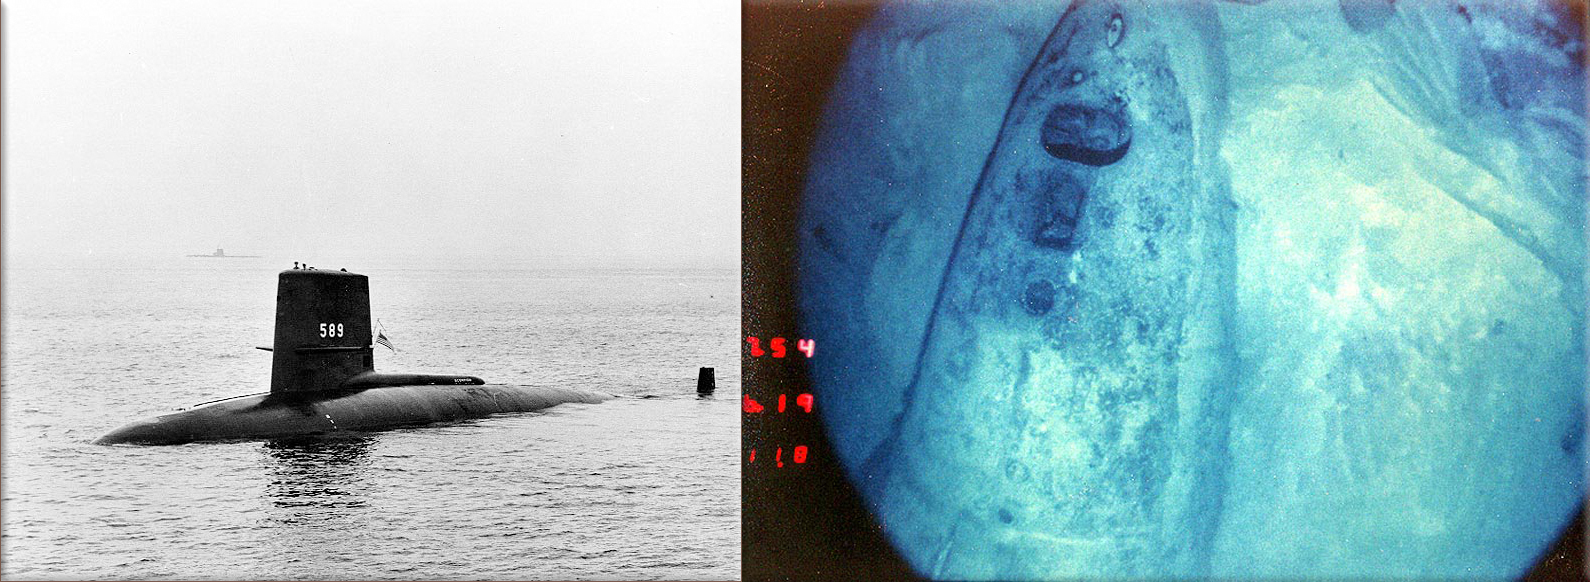 USS Scorpion (SSN-589) ● Bow section of the sunken Scorpion containing two nuclear torpedoes on the sea floor